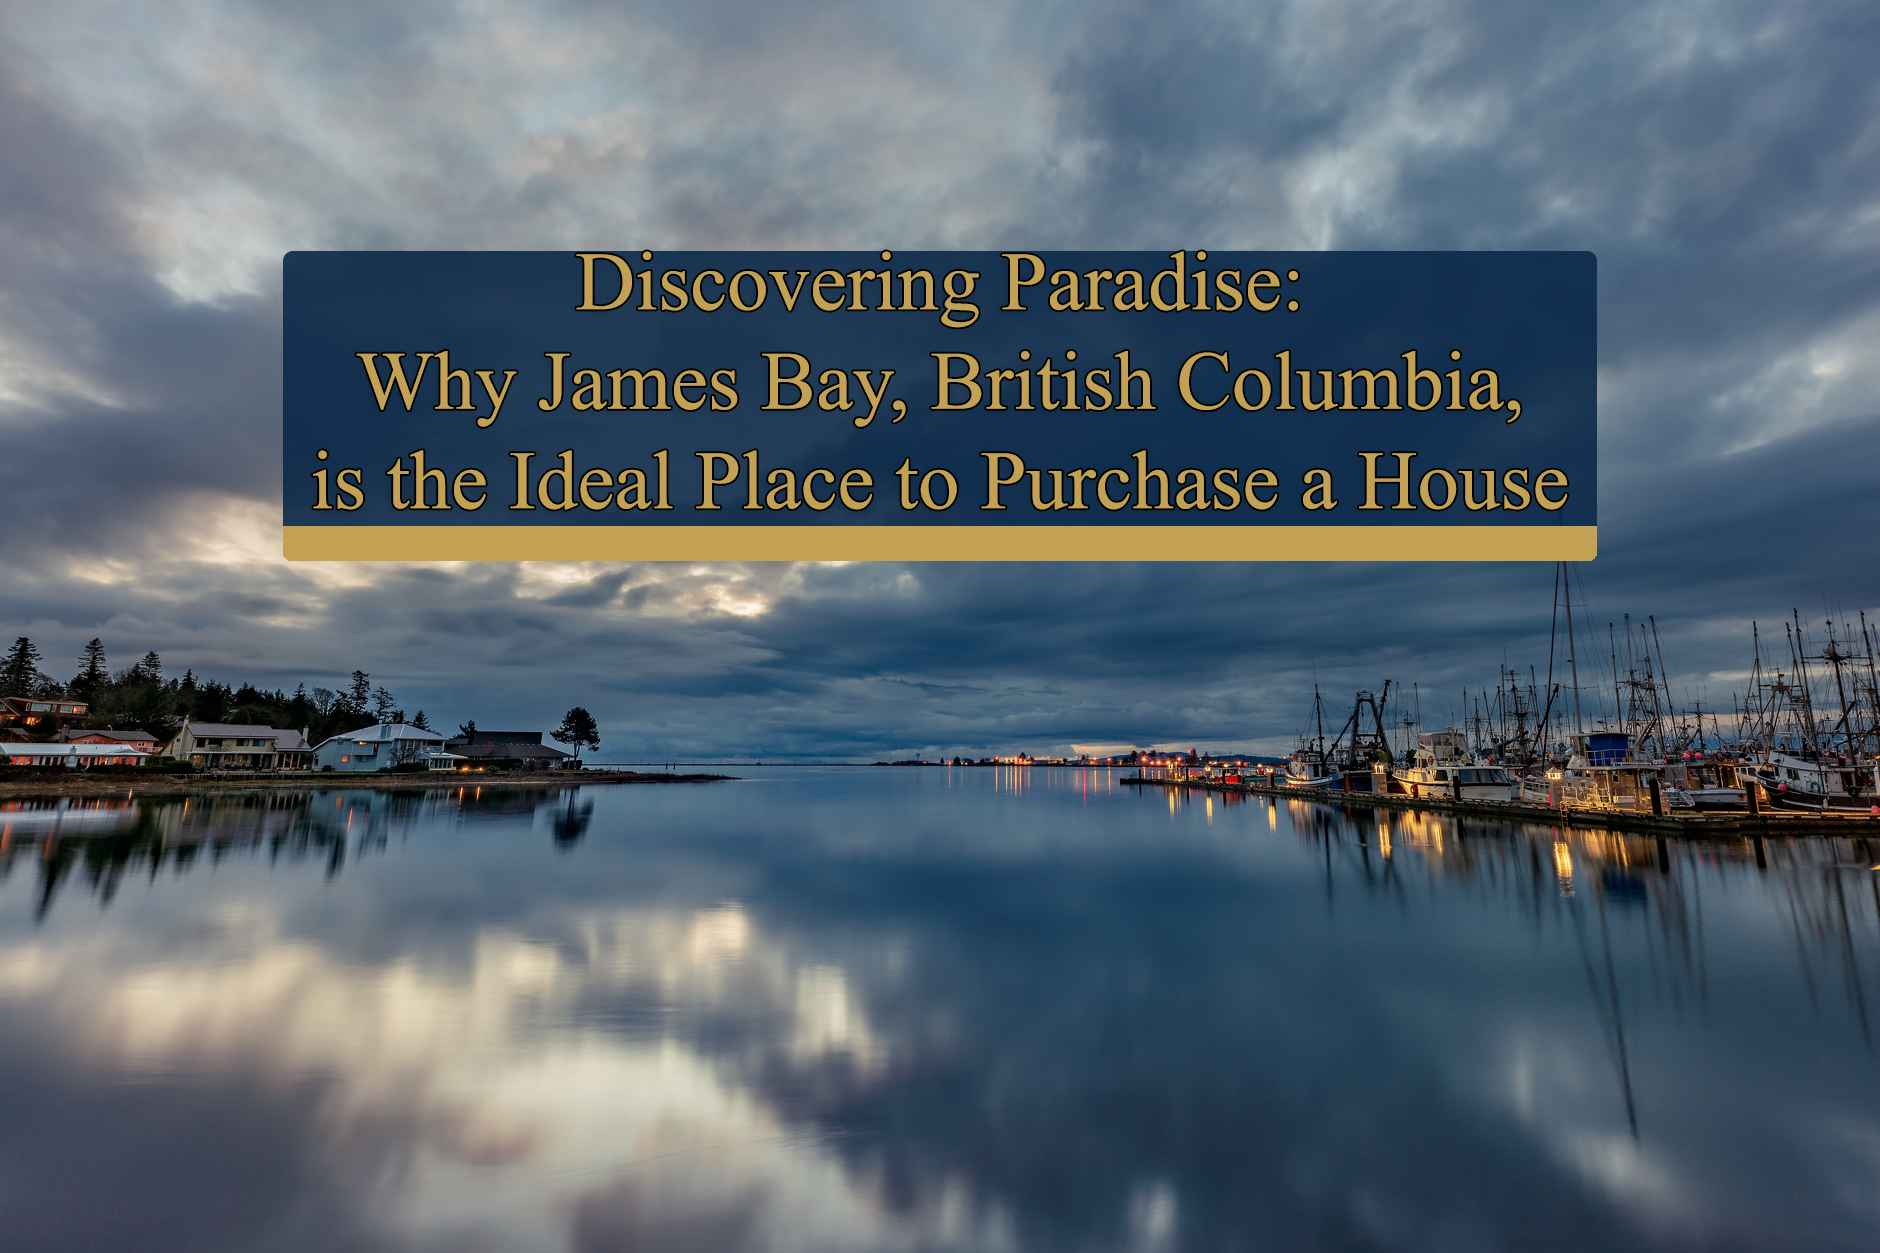 Why James Bay is the ideal place to purchase a house